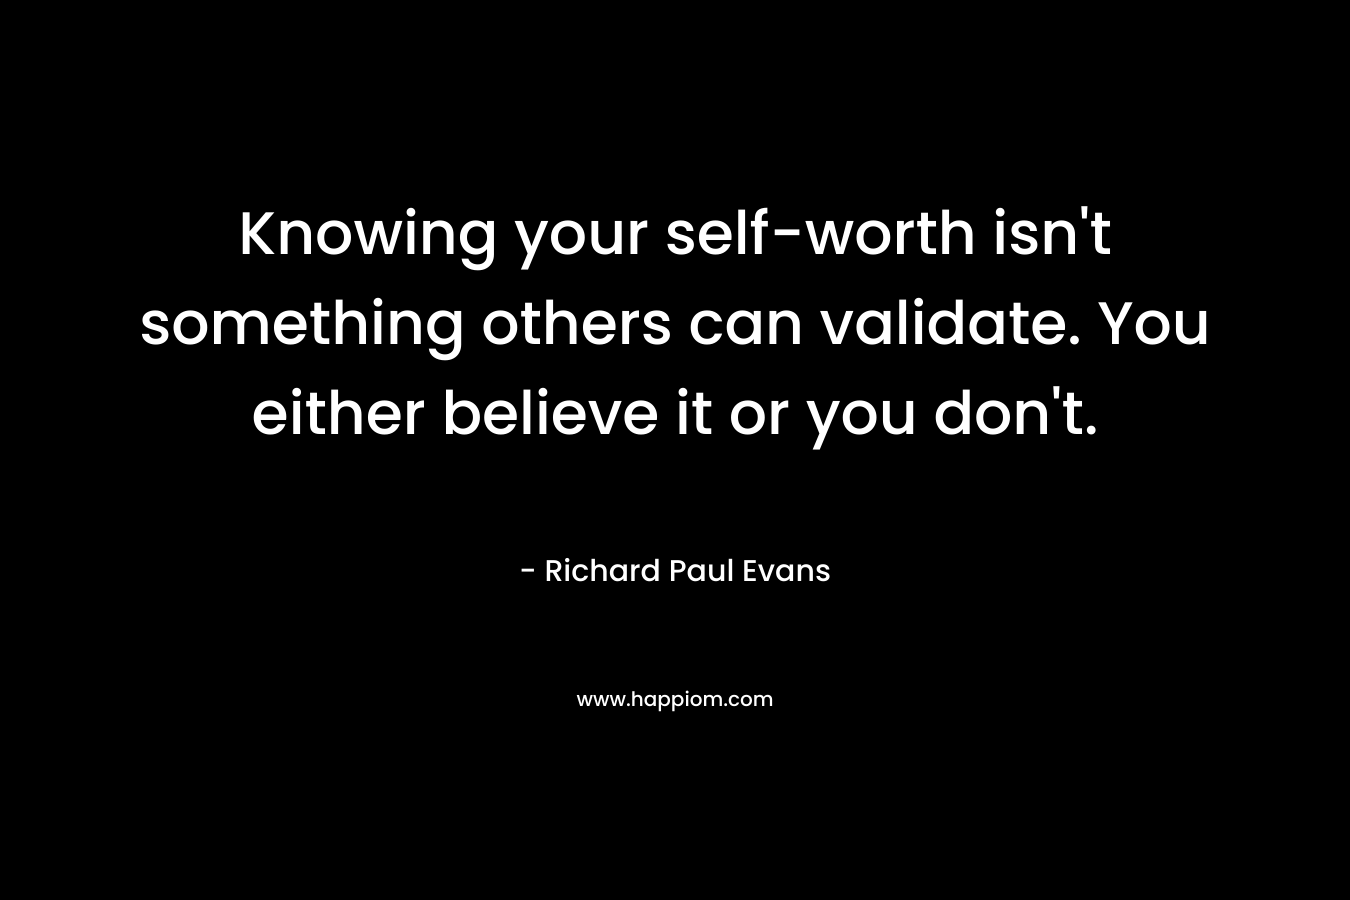 Knowing your self-worth isn't something others can validate. You either believe it or you don't.